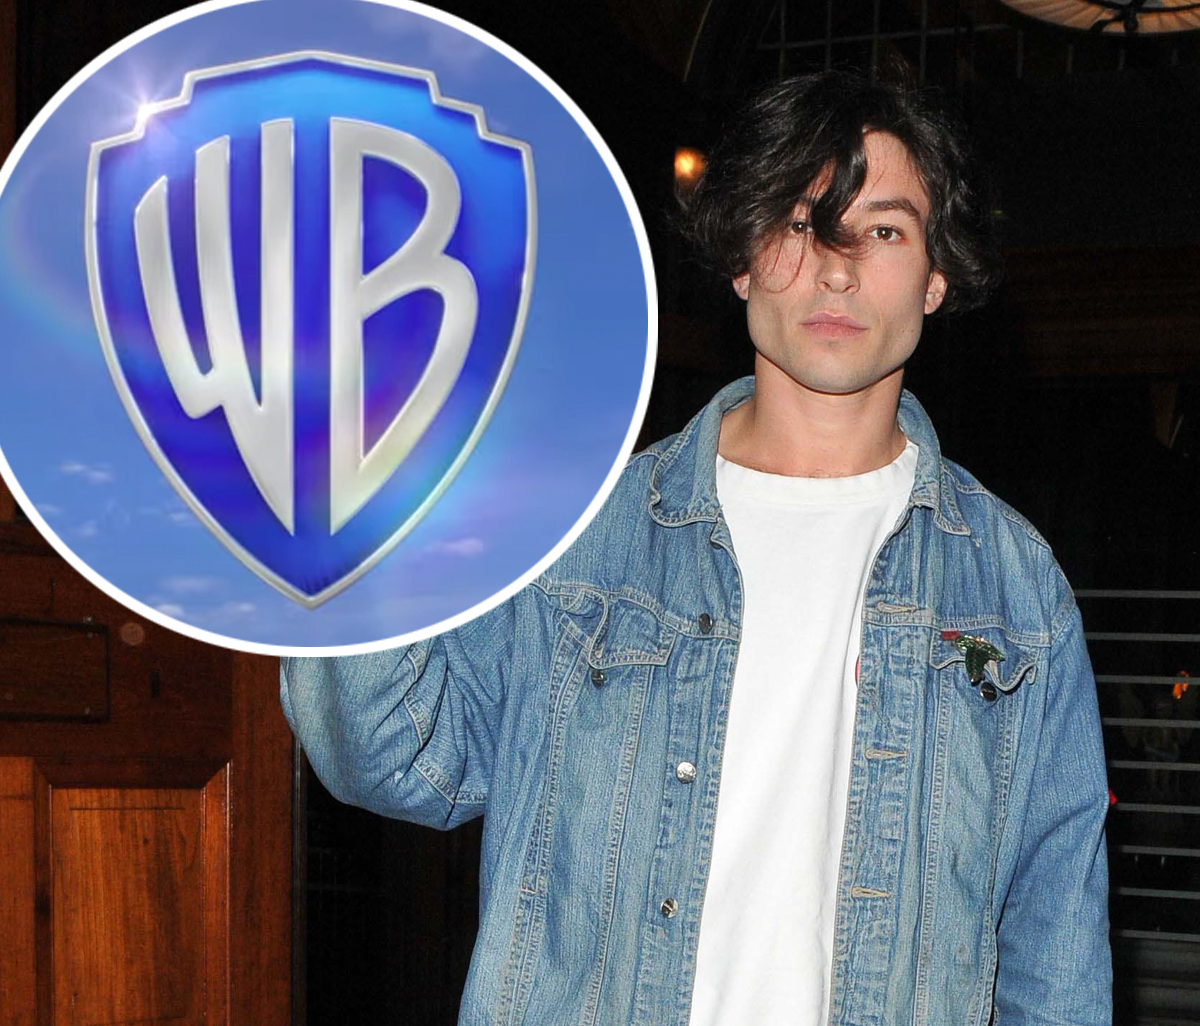 #WB May Trash The Flash After All Amid Ezra Miller’s Scandalous Behavior — Here Are Their Options!